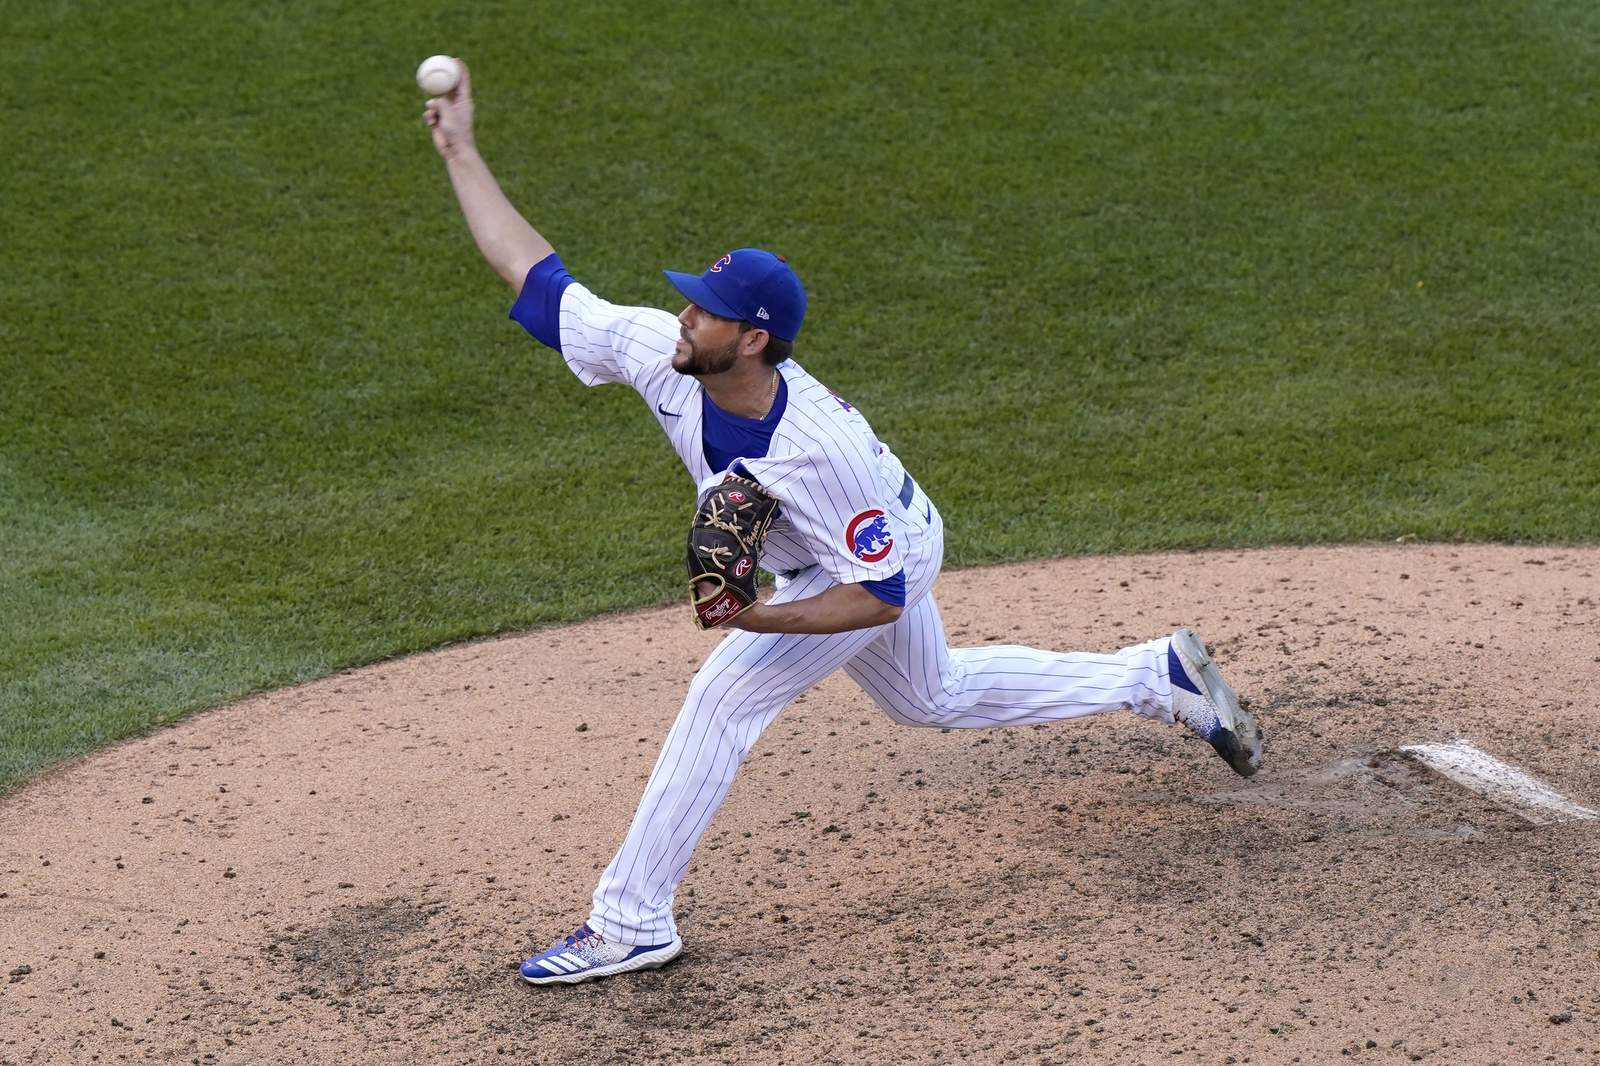 Ryan Tepera? Mix-up gives curious MVP vote to Cubs pitcher